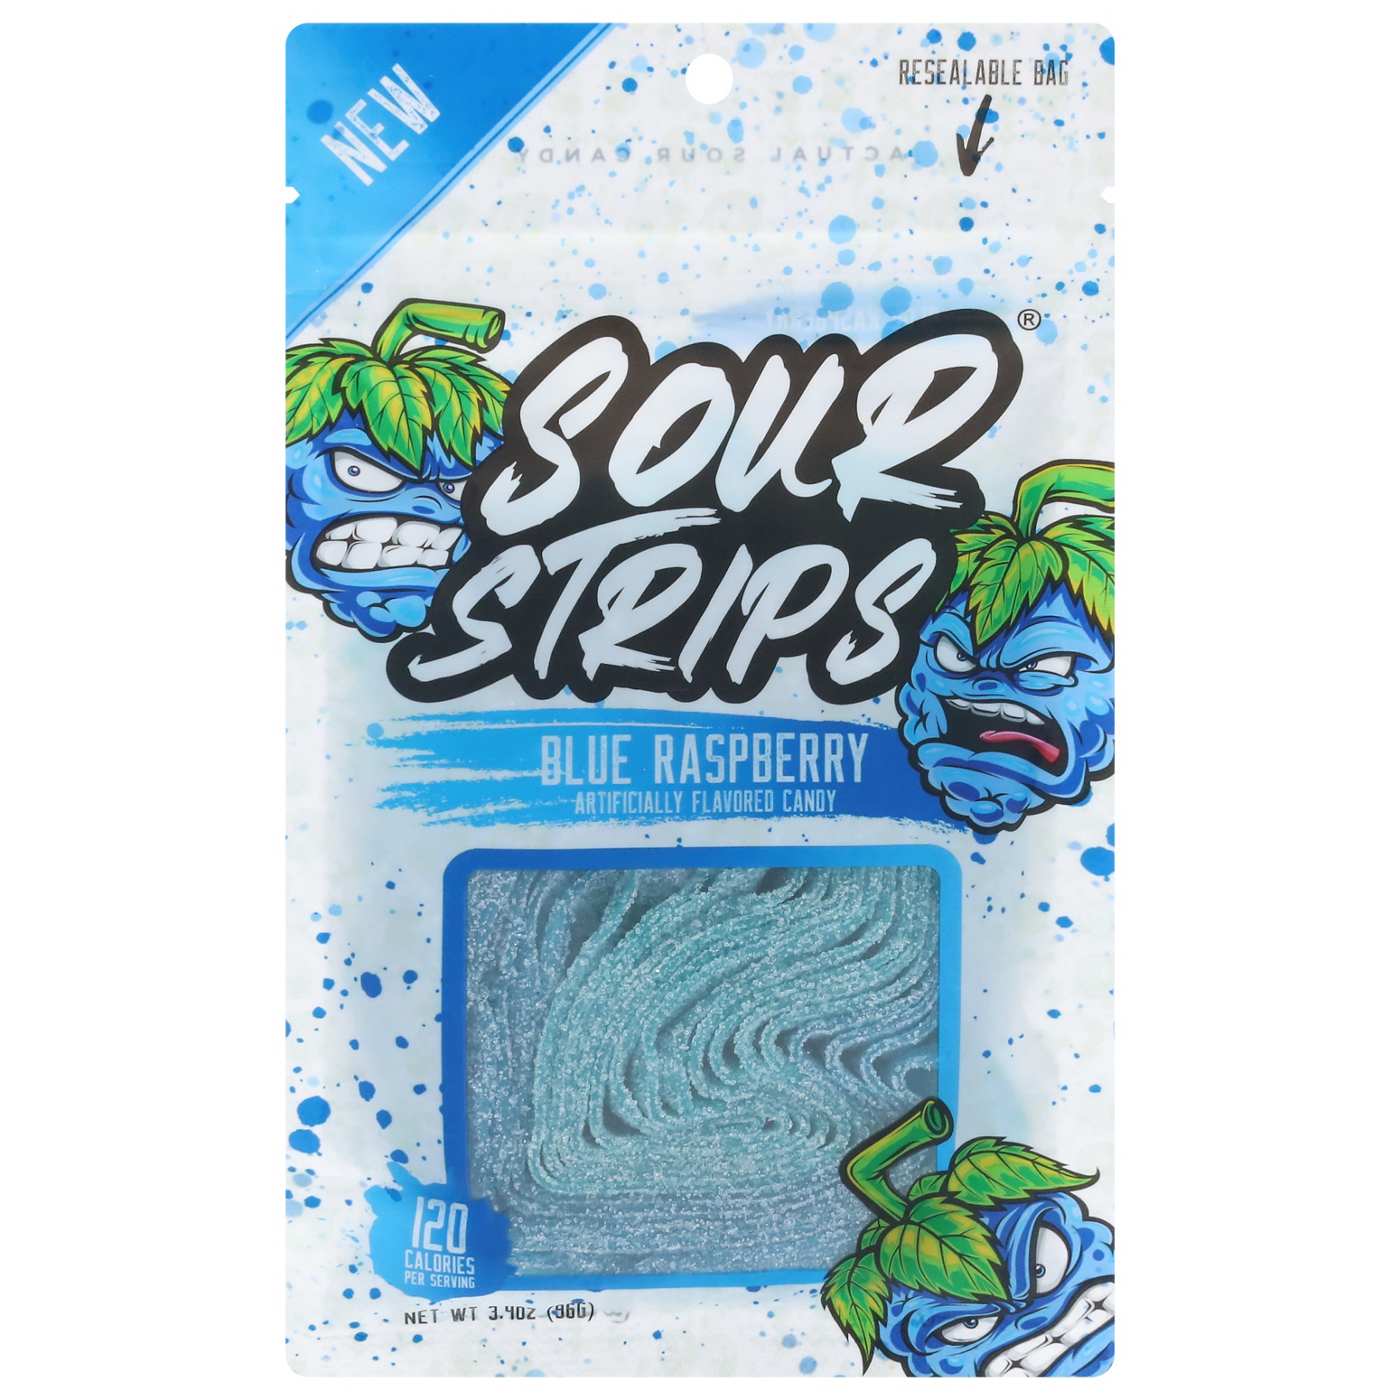 Sour Strips Blue Raspberry Candy; image 1 of 2